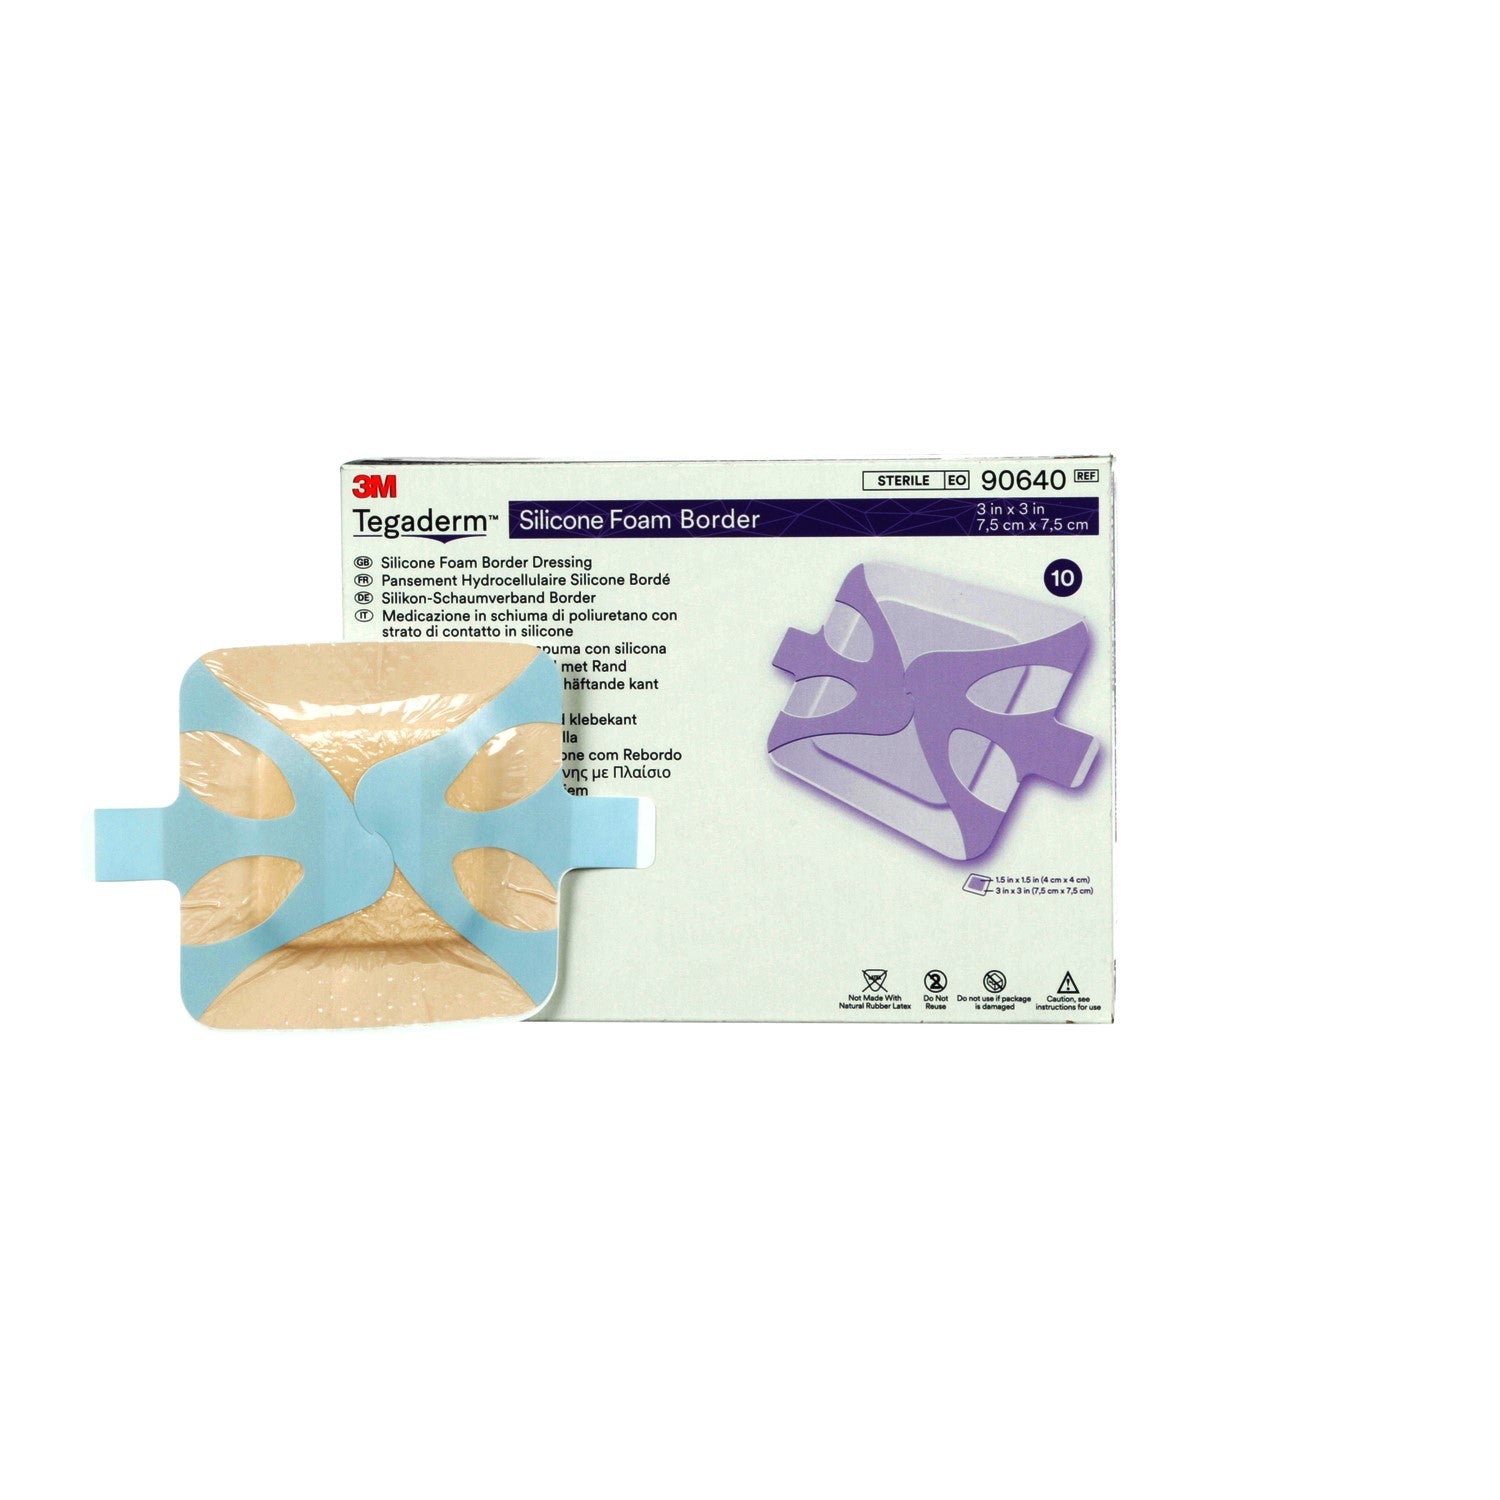 BX/10 - 3M Tegaderm&trade; Silicone Foam Border Dressing, 3" x 3", Pad Size 1.5" x 1.5" - Best Buy Medical Supplies